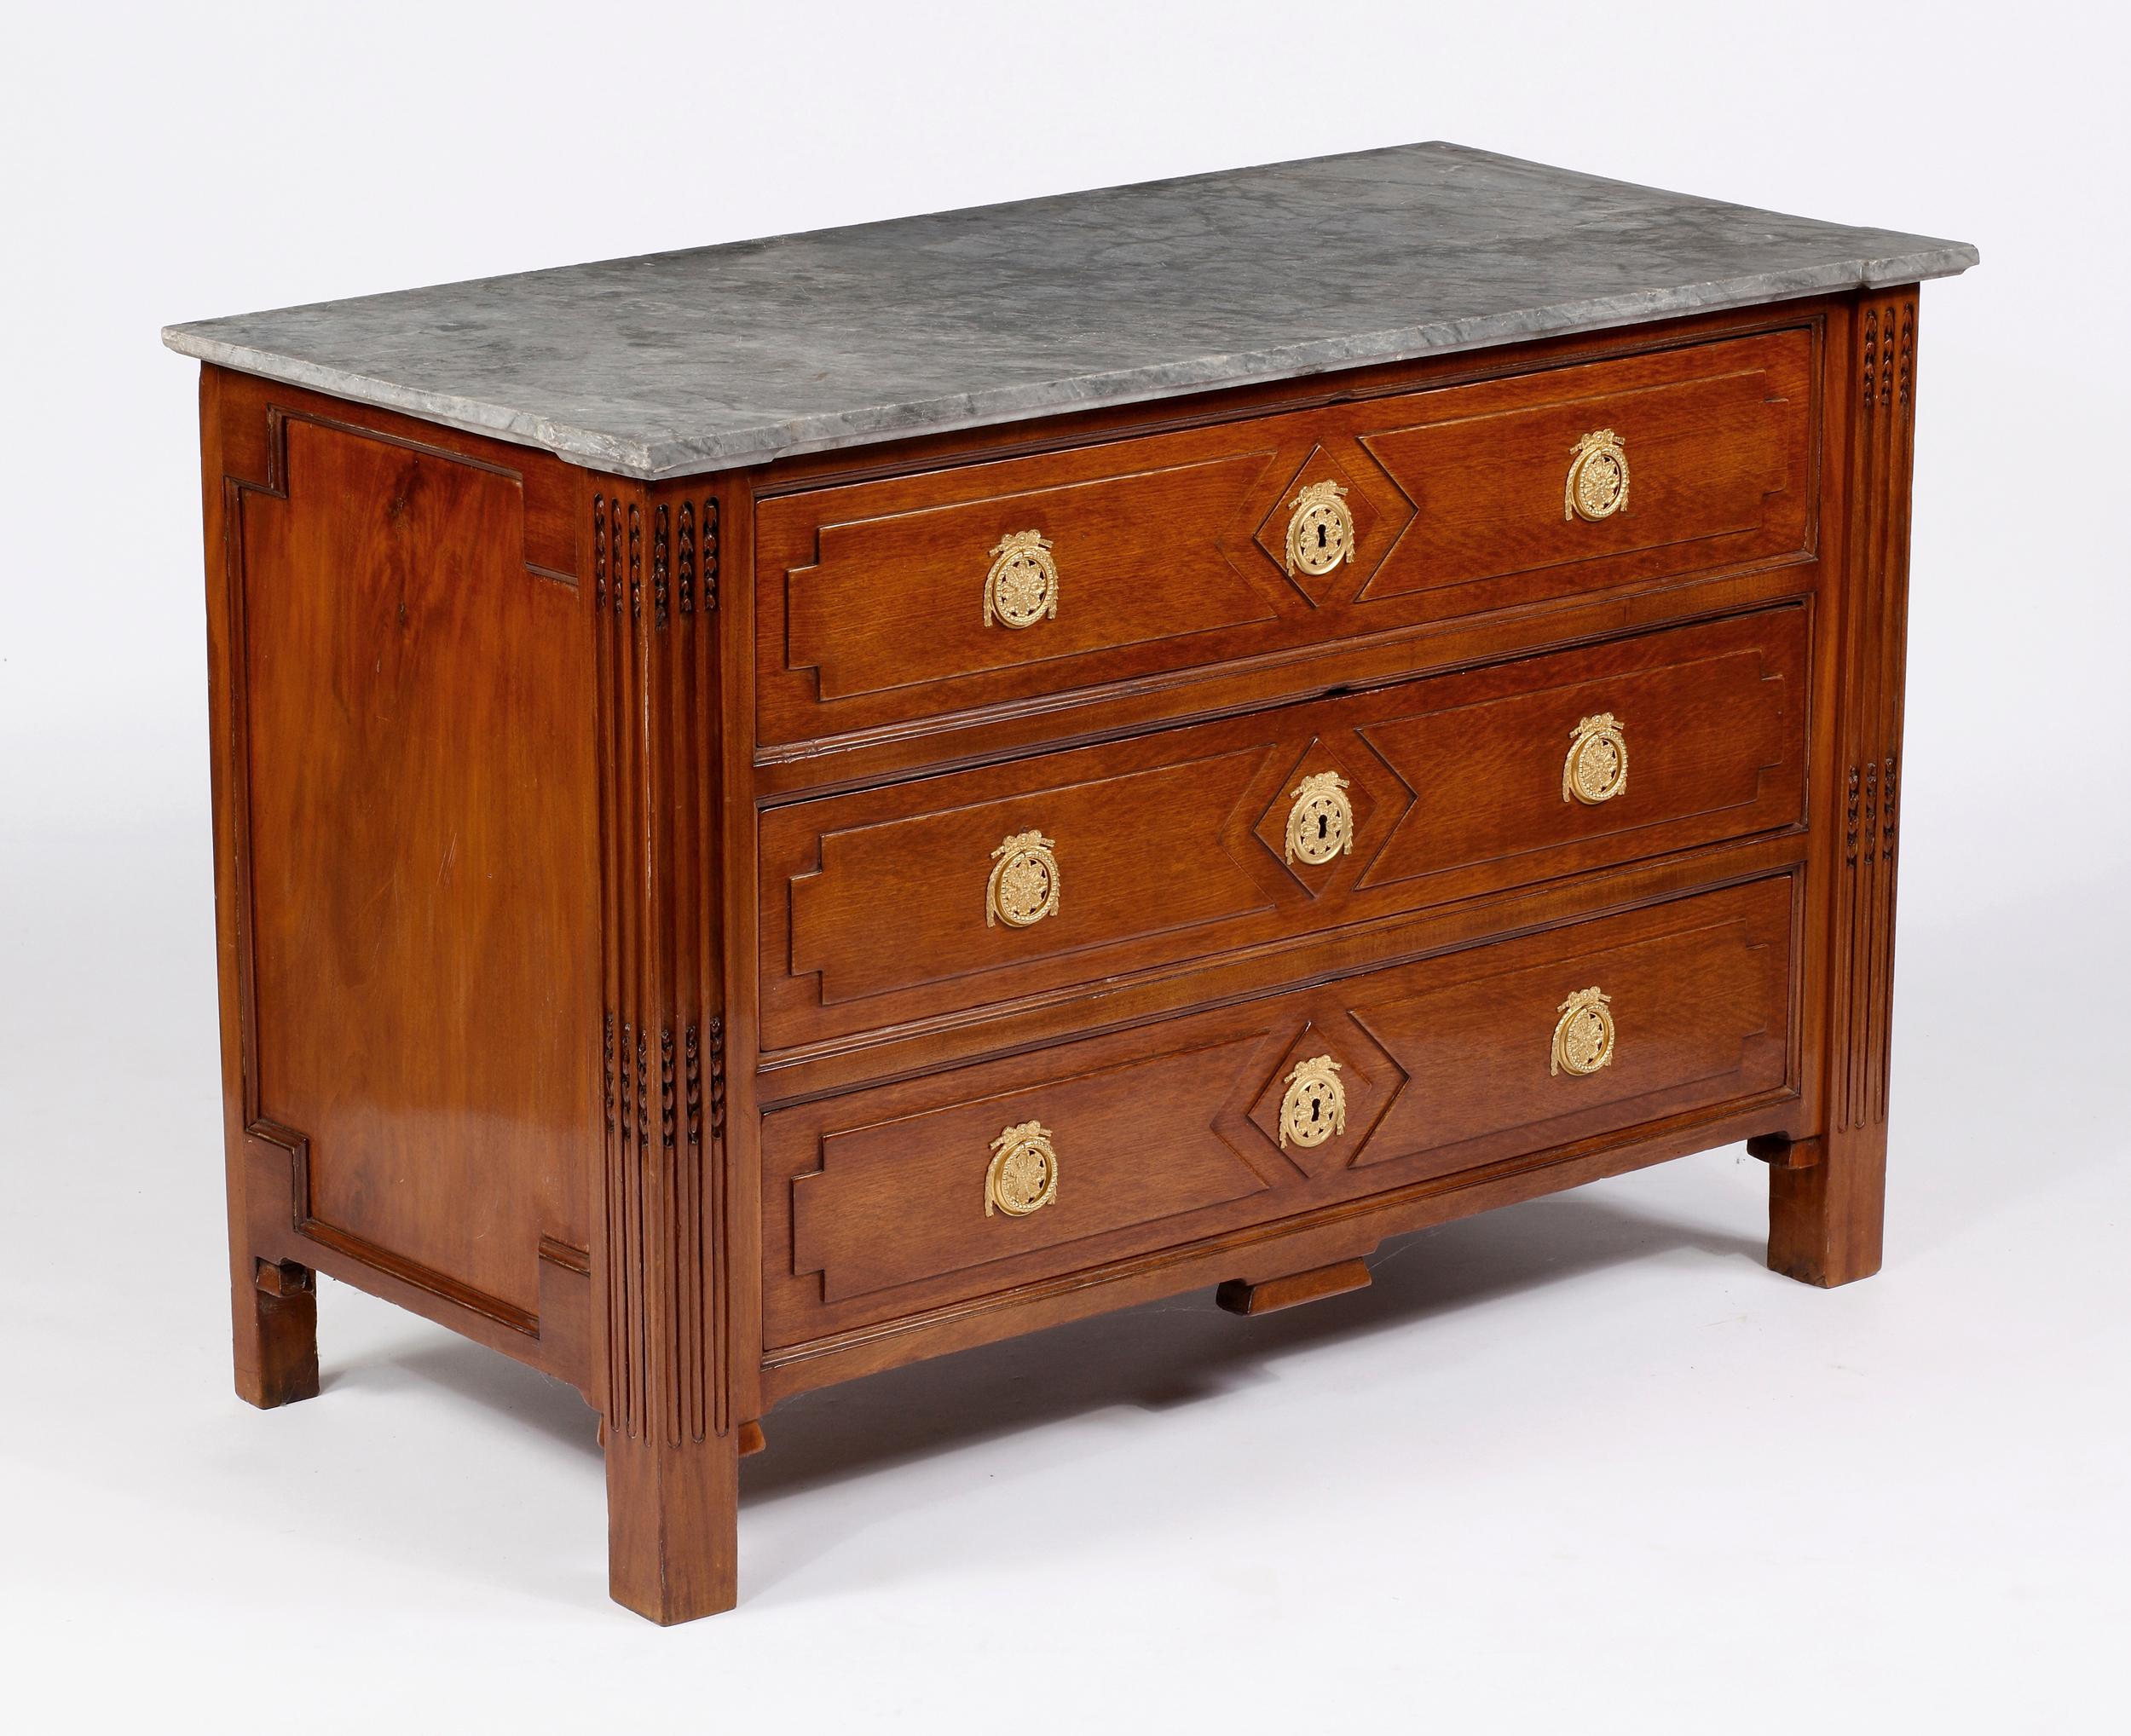 French A Fine Louis XVI Parisian Mahogany Marble Top Commode, 18th Century For Sale